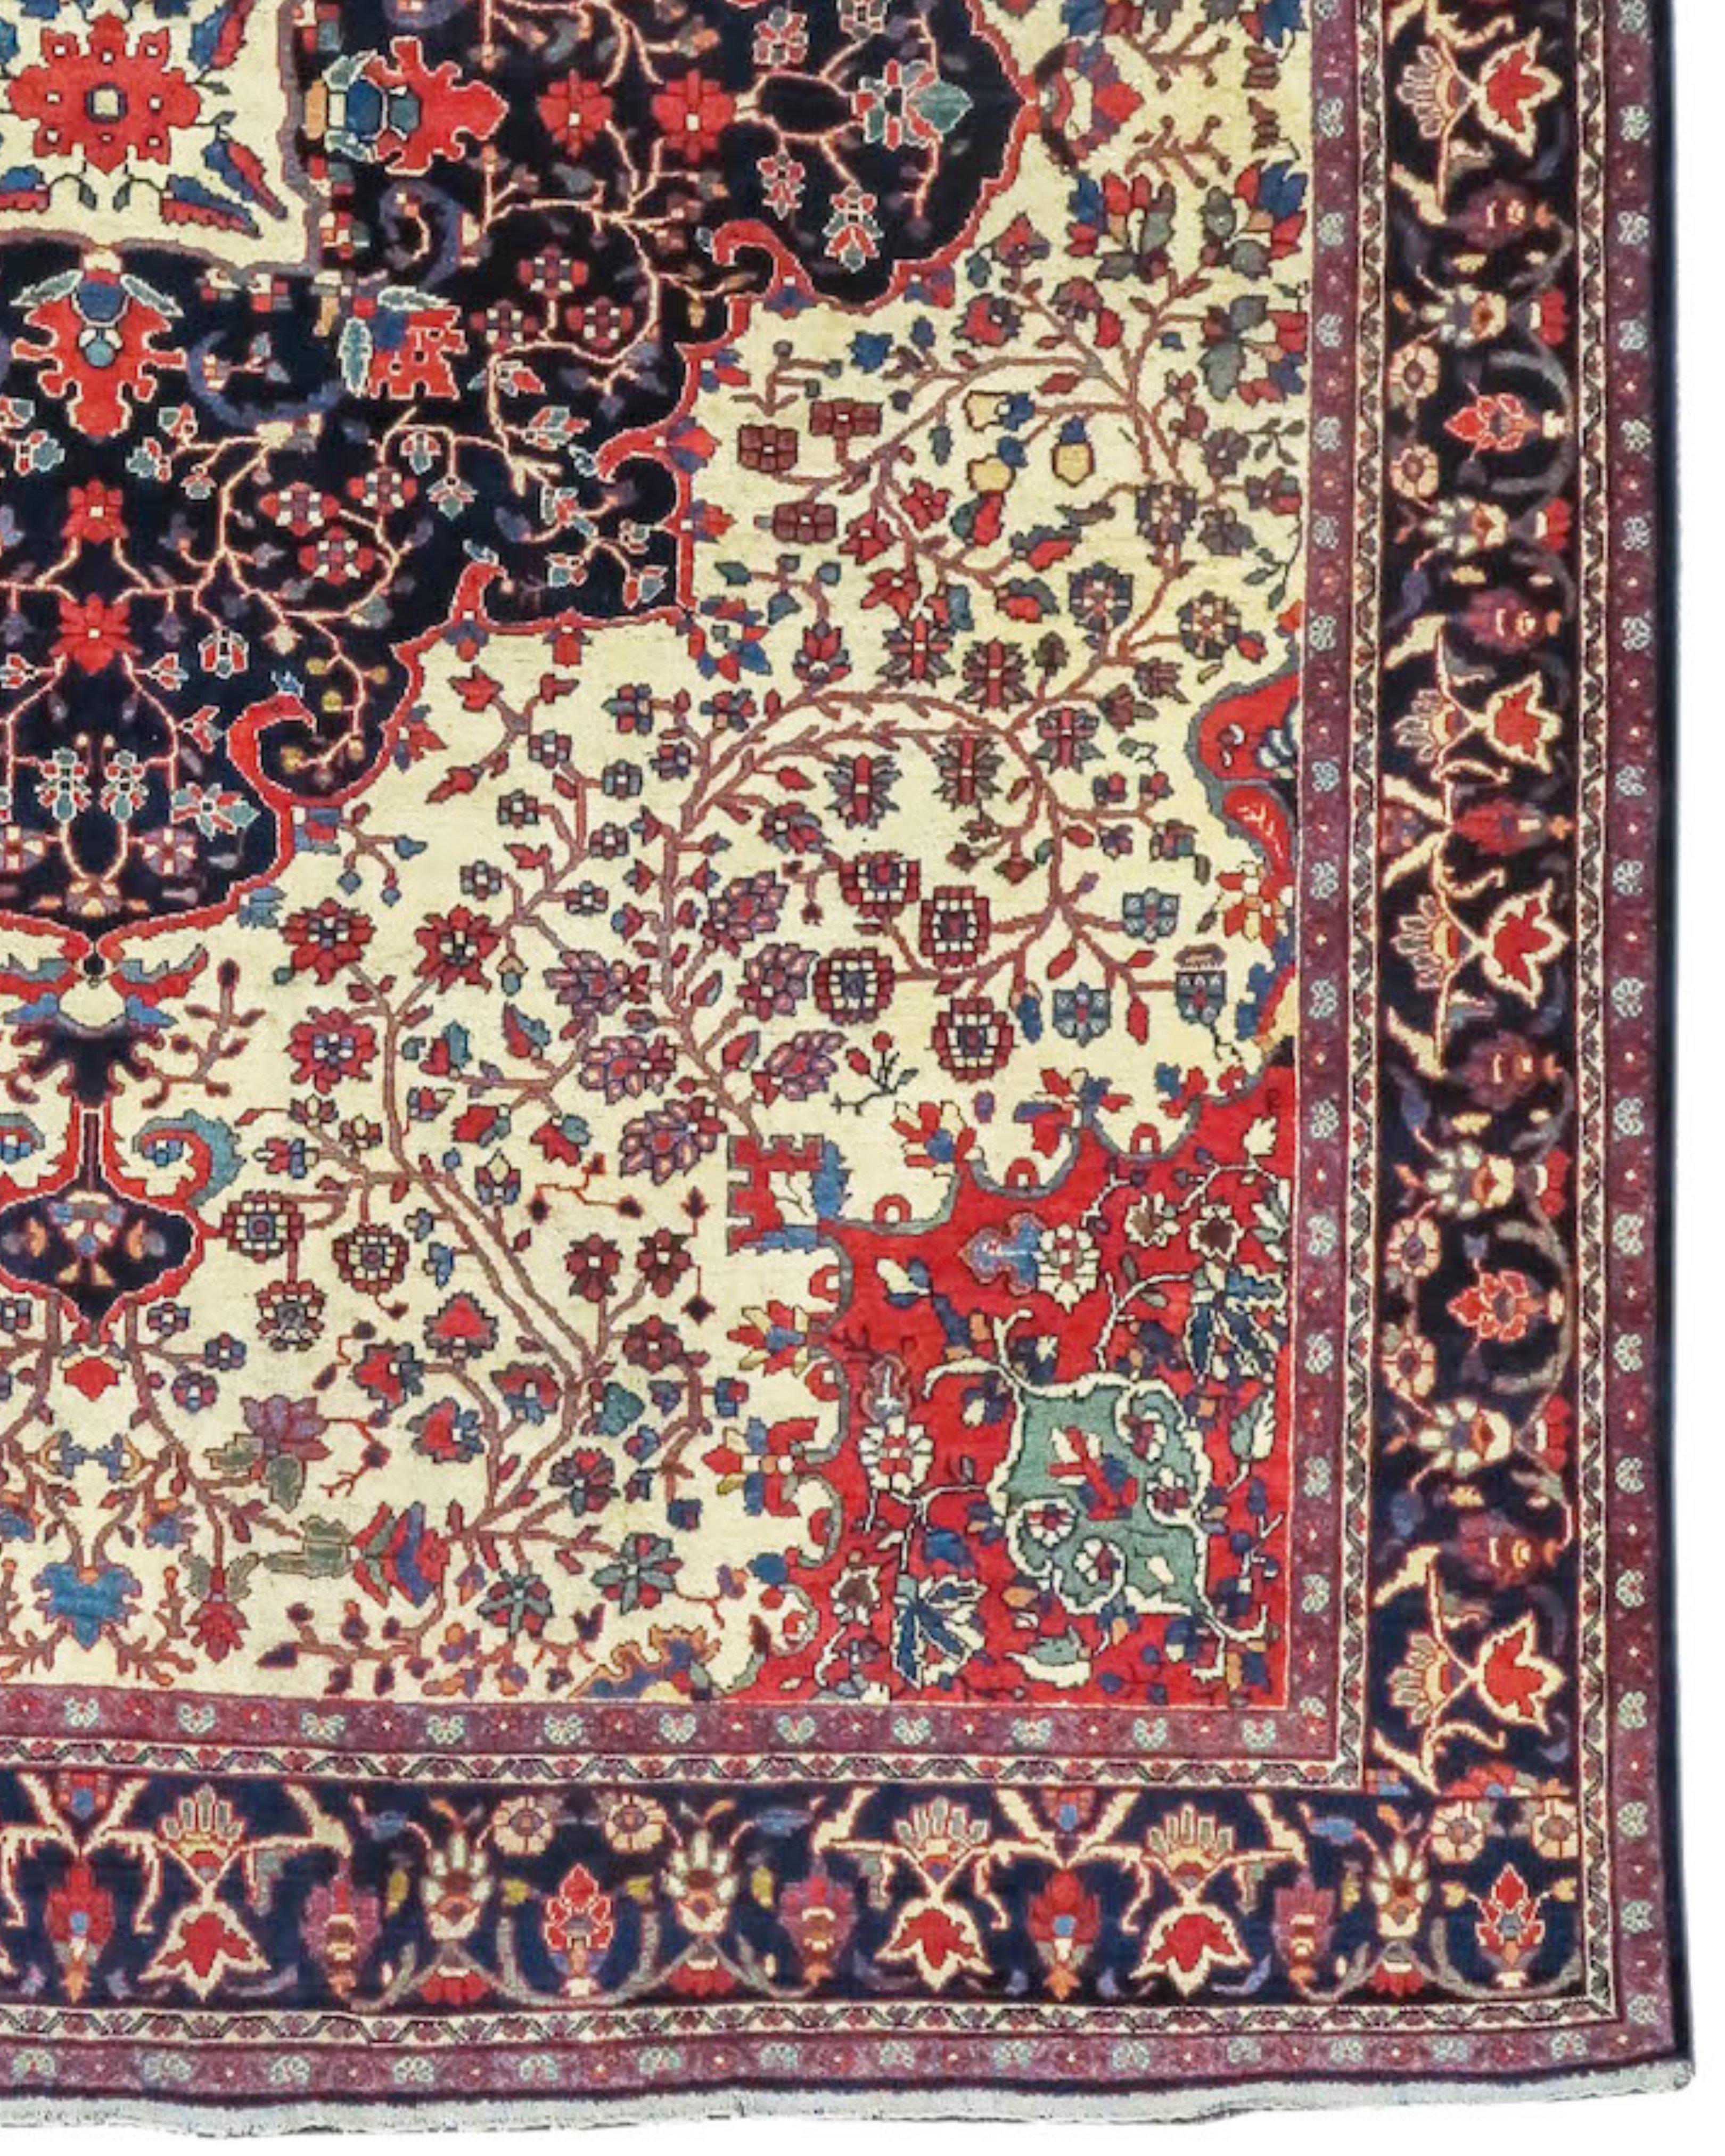 Fereghan Carpet Rug, circa 1900

Delicate networks of blossoming vine-scroll meander through both the field and central medallion of this fine Fereghan Sarouk carpet from central Persia. This is a masterfully balanced piece with light complimenting